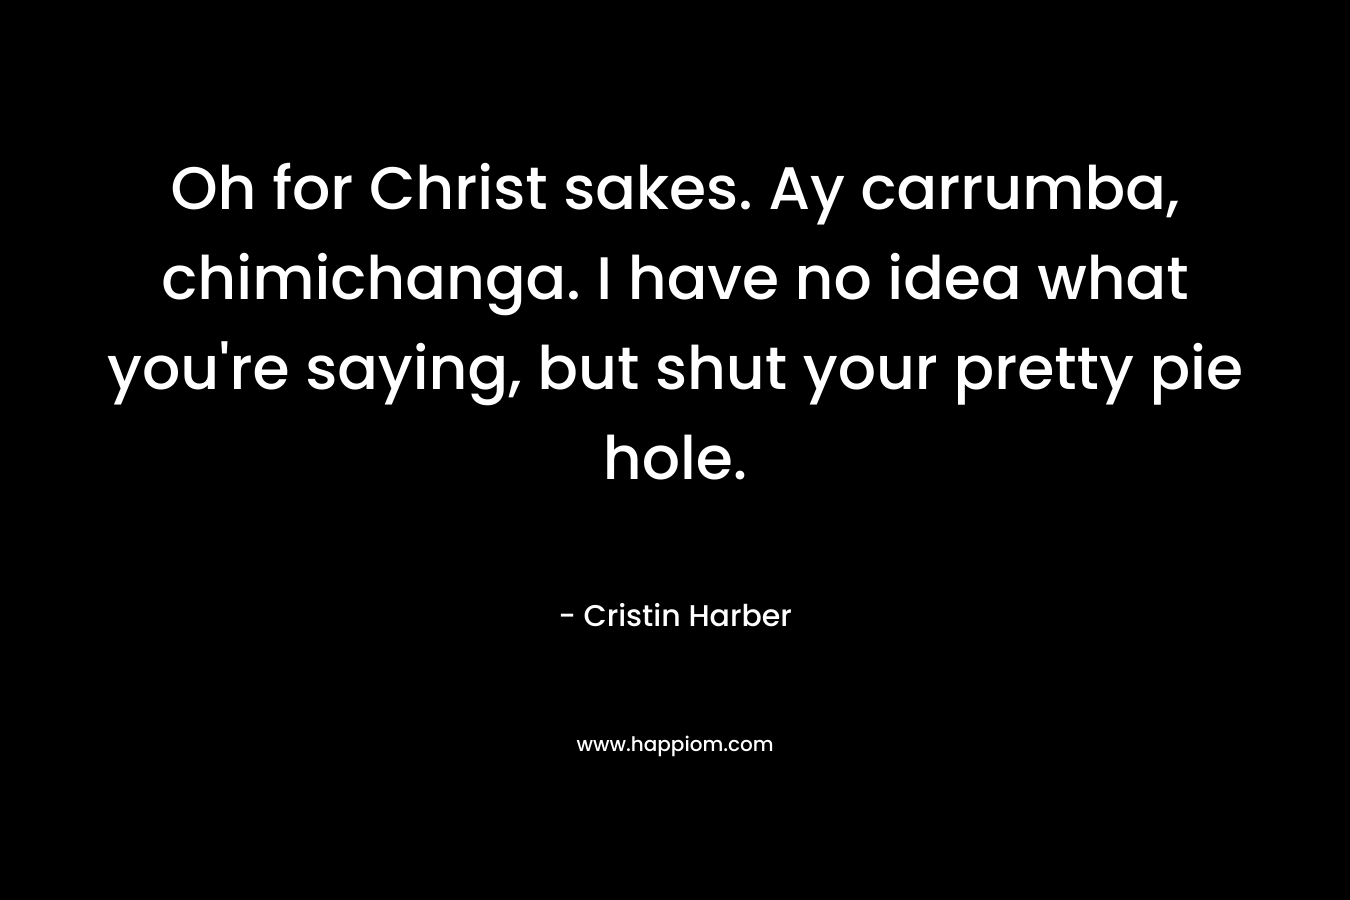 Oh for Christ sakes. Ay carrumba, chimichanga. I have no idea what you’re saying, but shut your pretty pie hole. – Cristin Harber